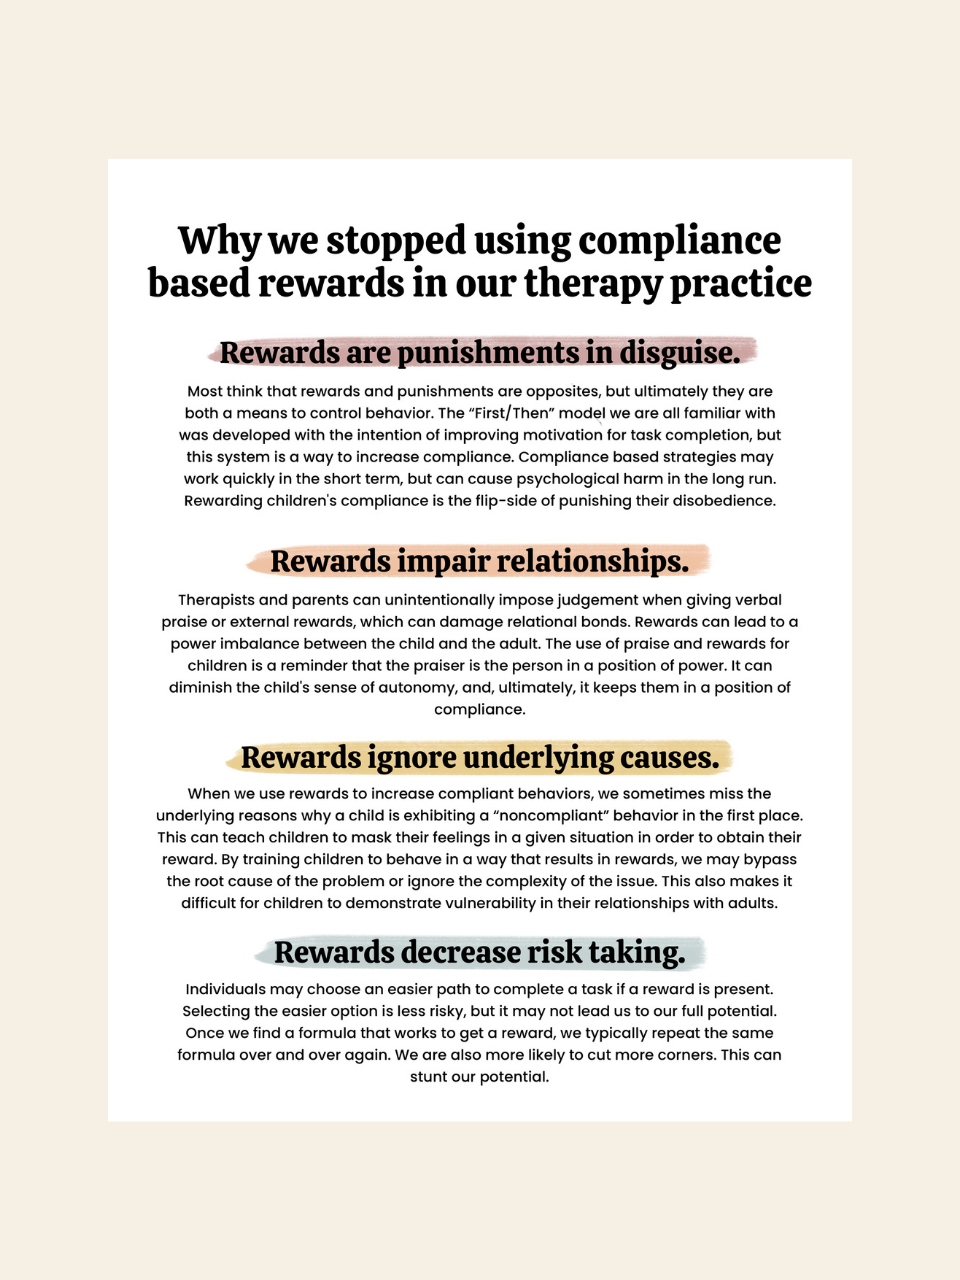 Why we stopped using compliance based rewards in our therapy practice.